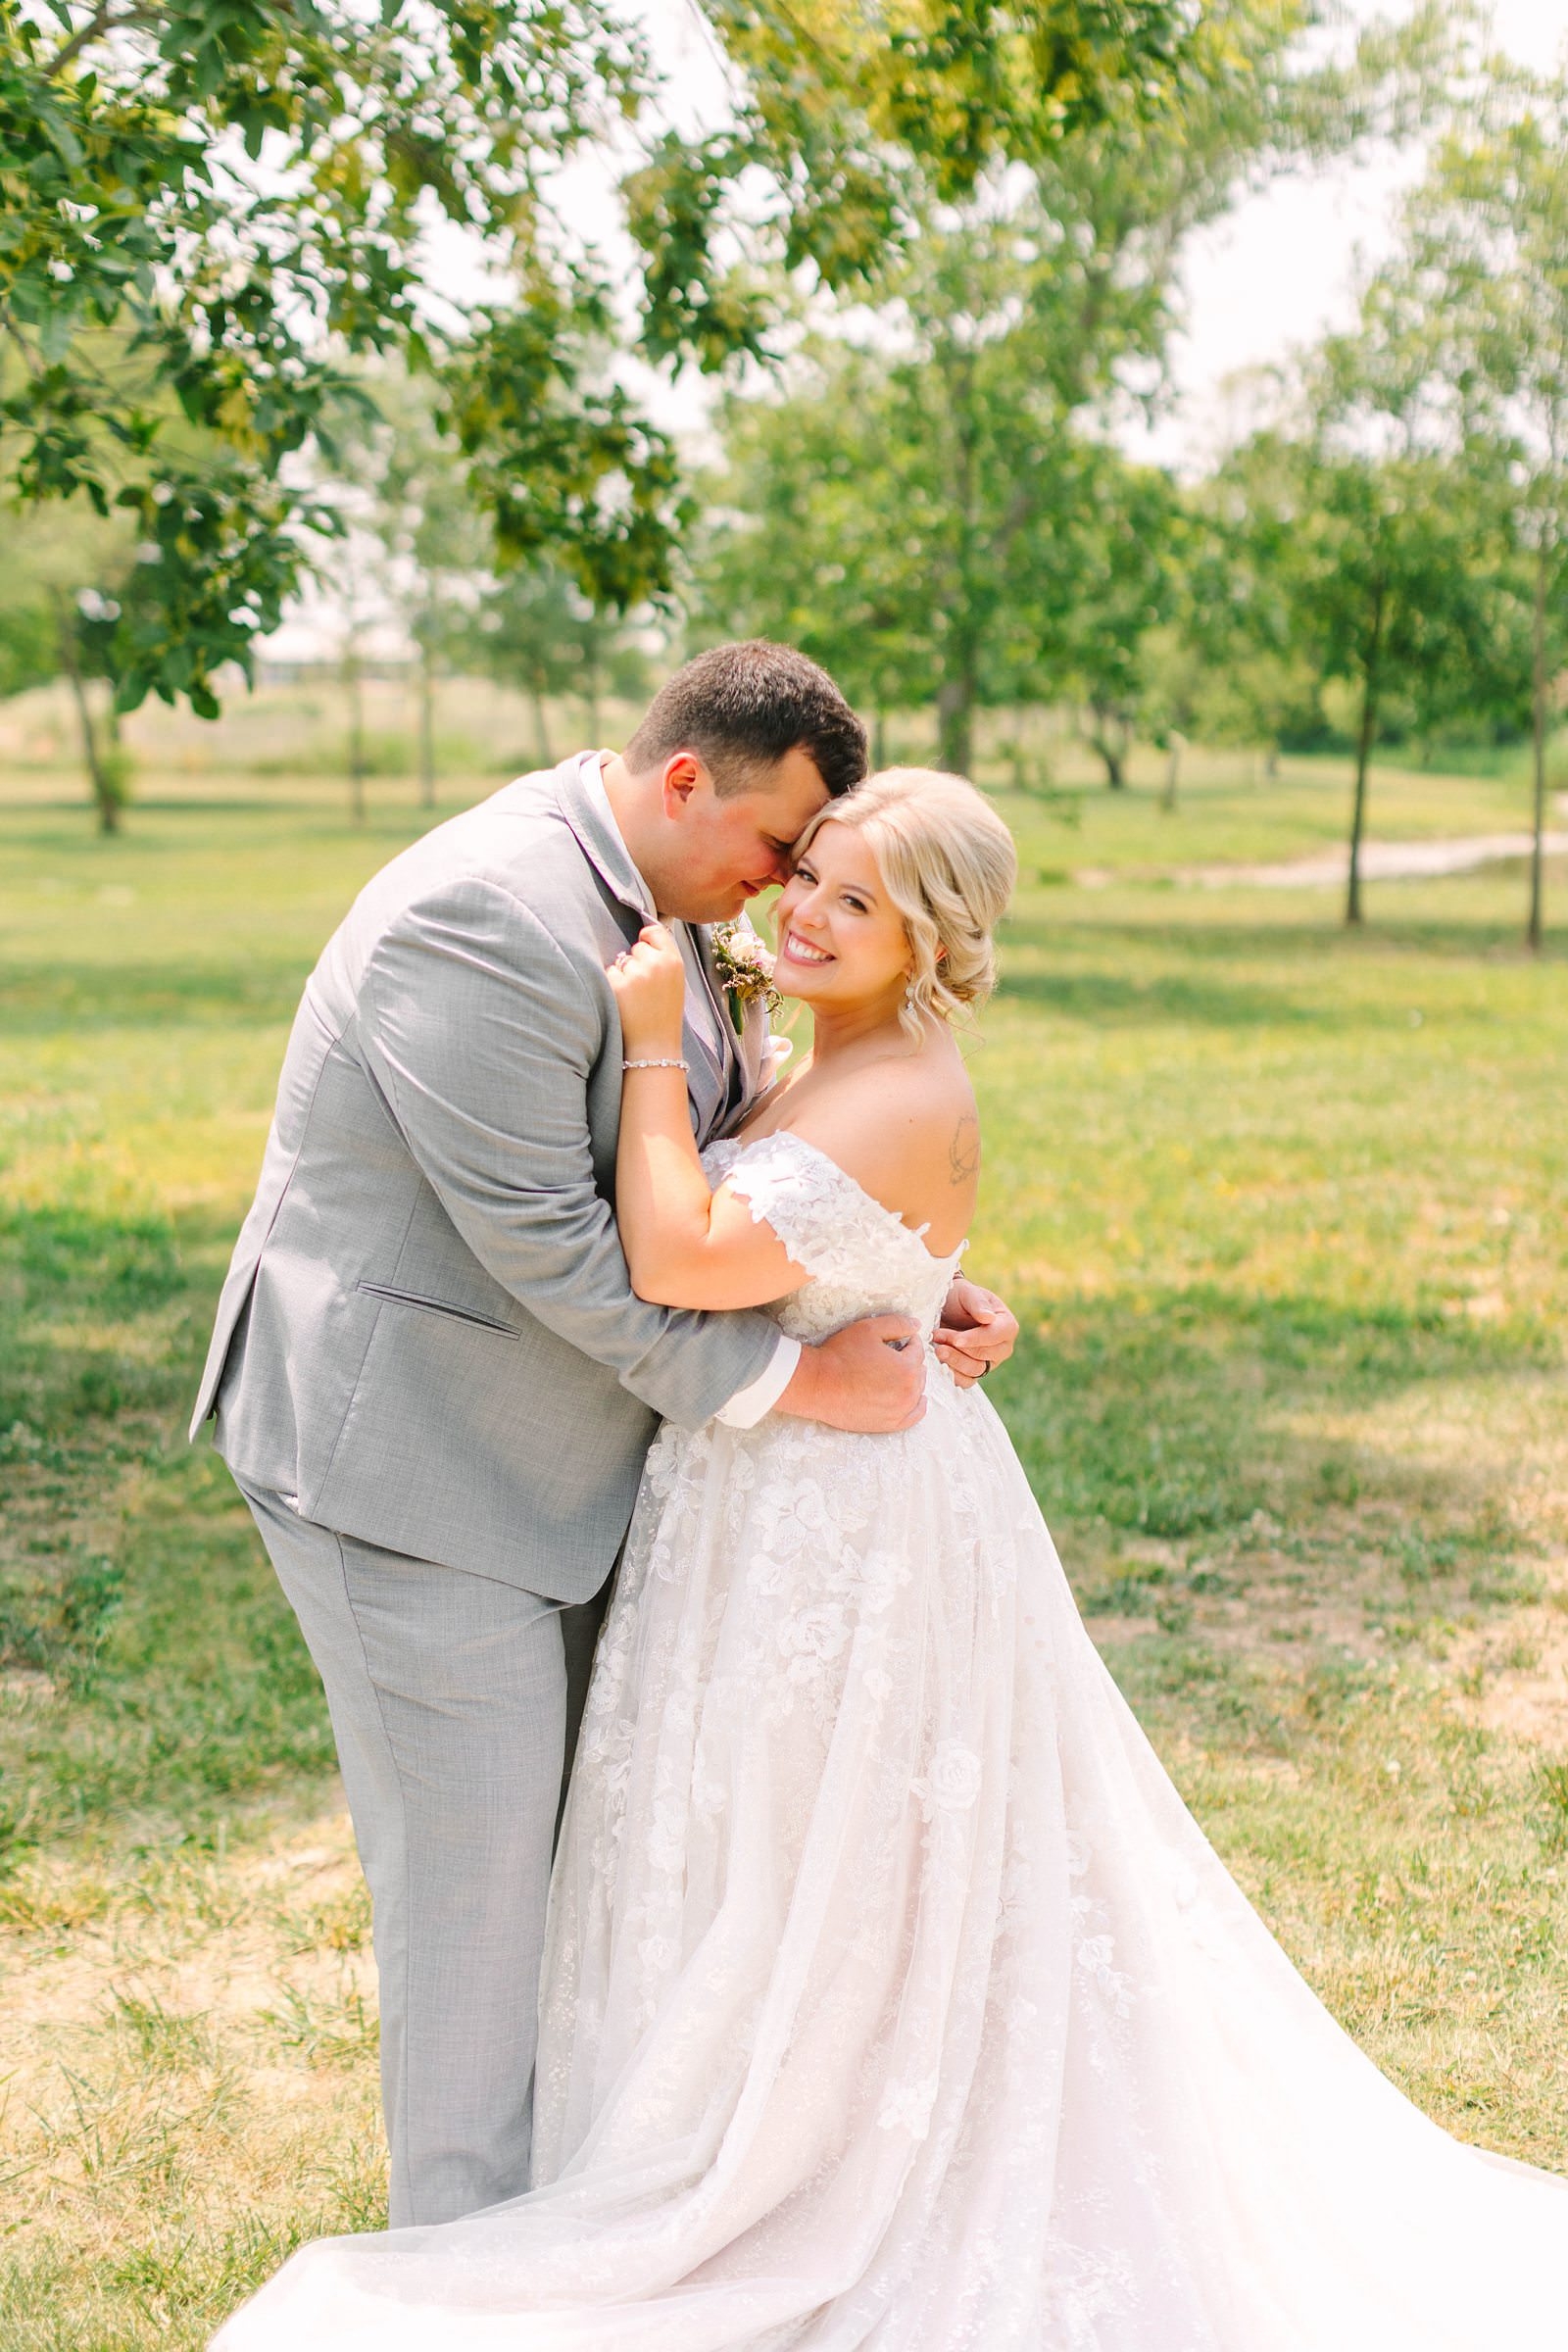 A Sunny Summer Wedding at Friedman Park in Newburgh Indiana | Paige and Dylan | Bret and Brandie Photography093.jpg